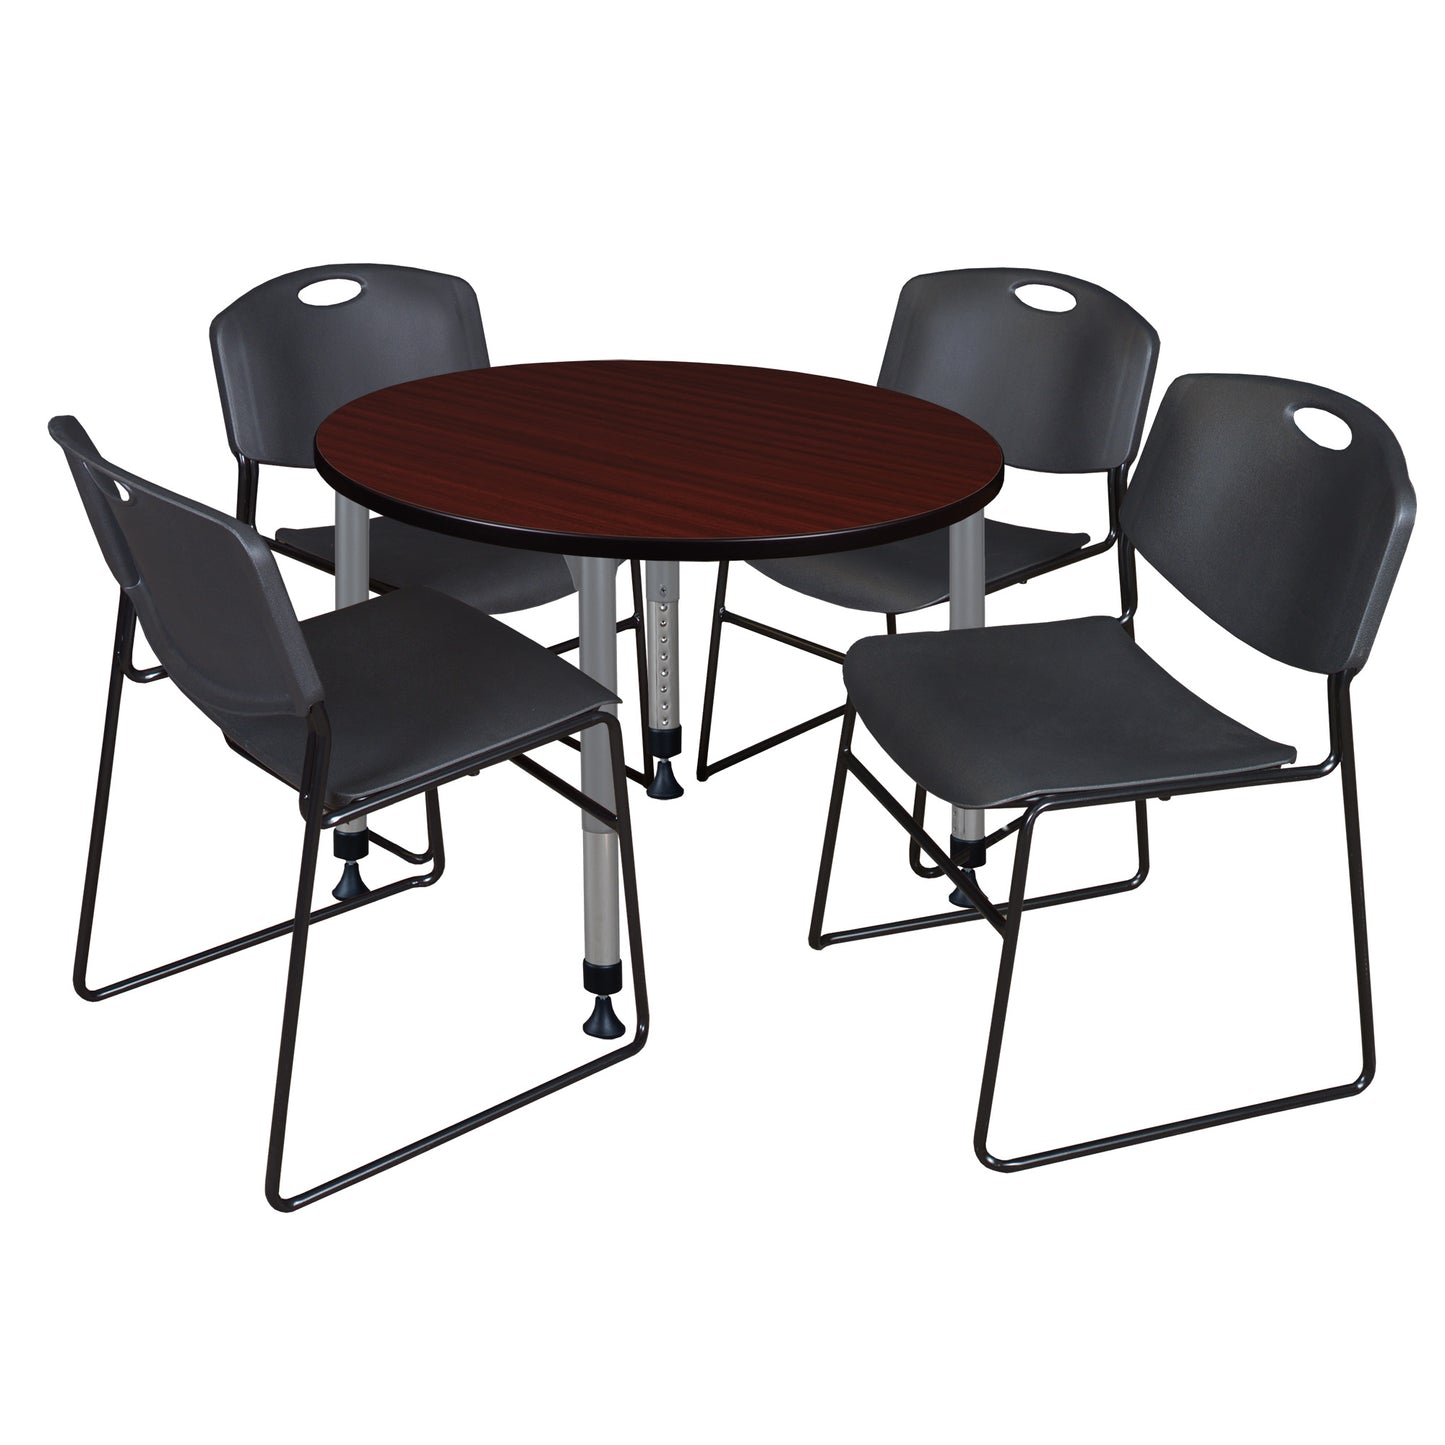 Regency Kee 36 in. Round Adjustable Classroom Table & 4 Zeng Stack Chairs